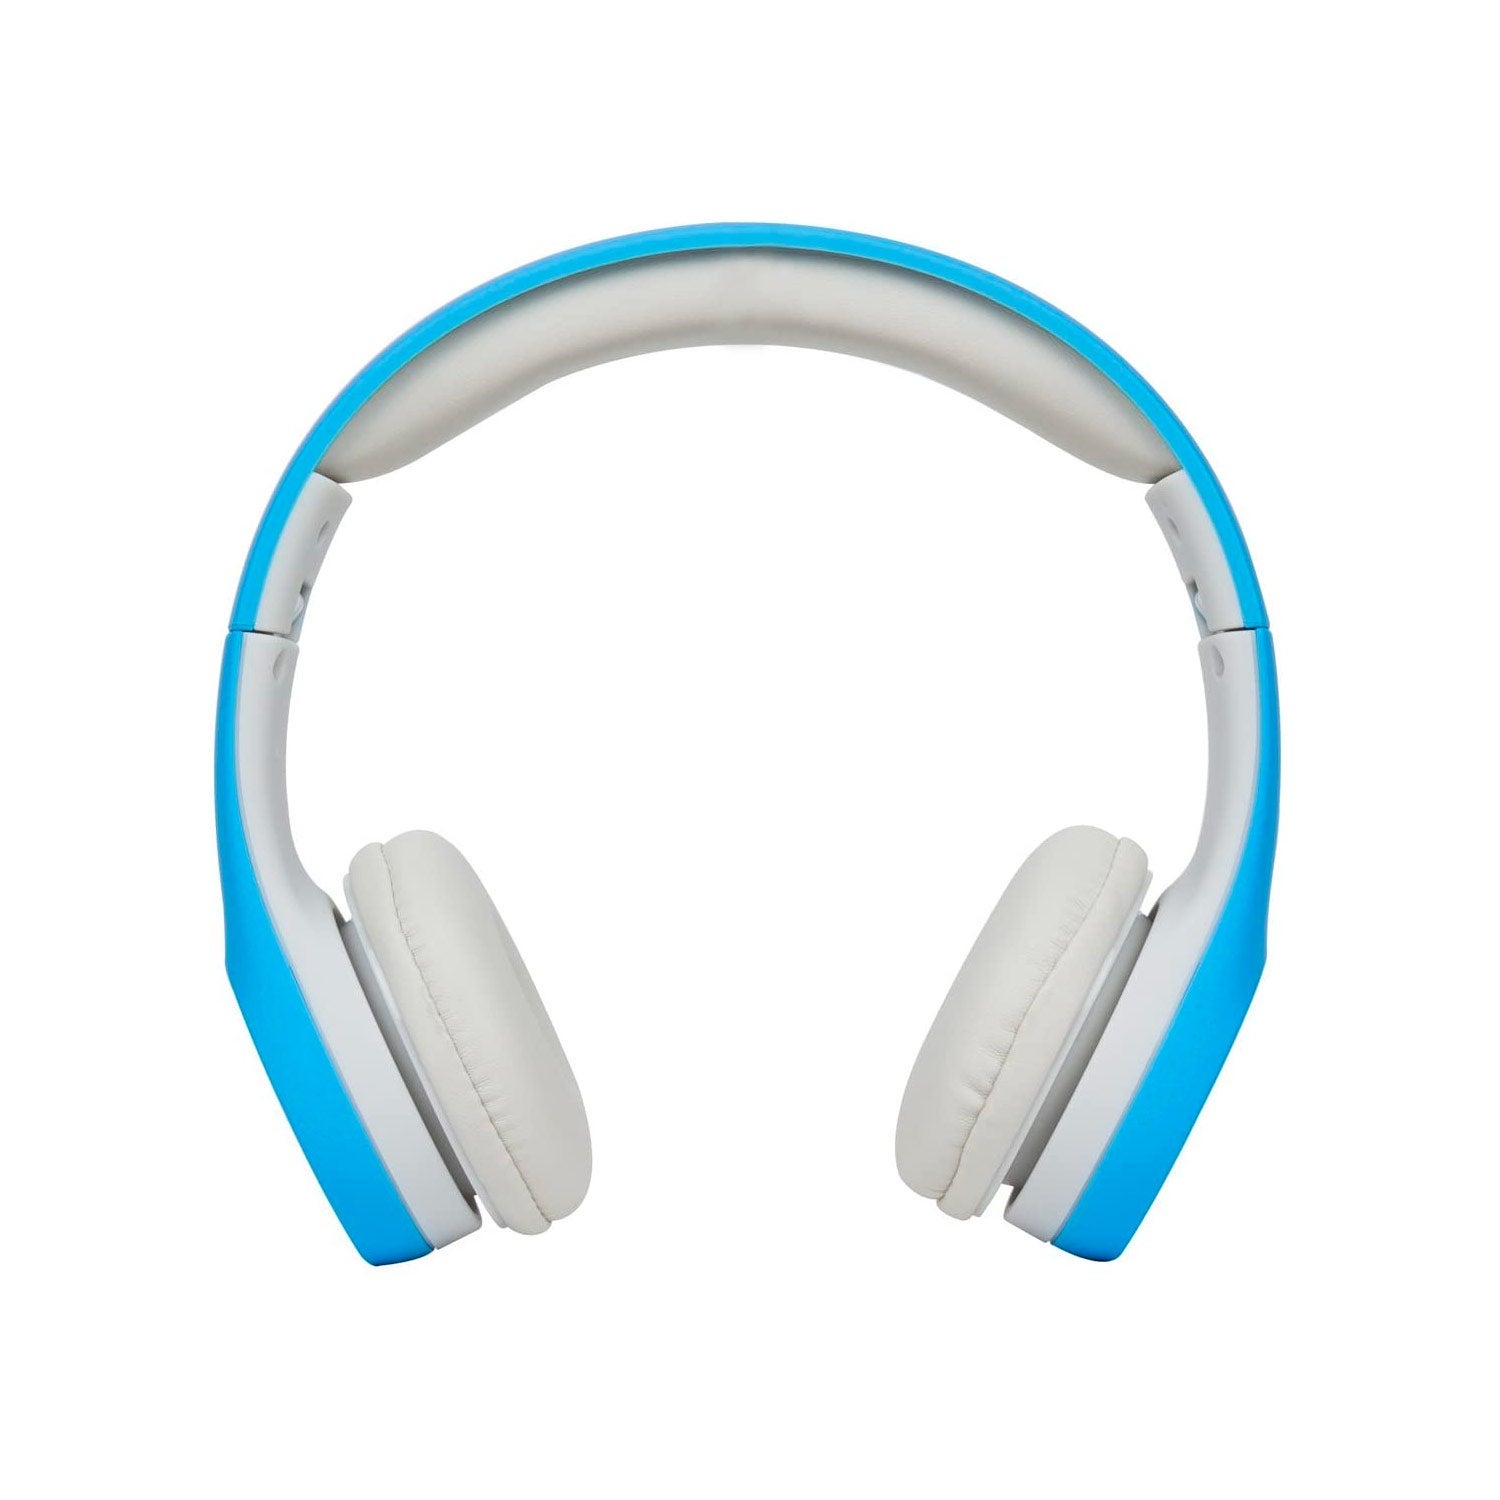 Blue and white headphones.